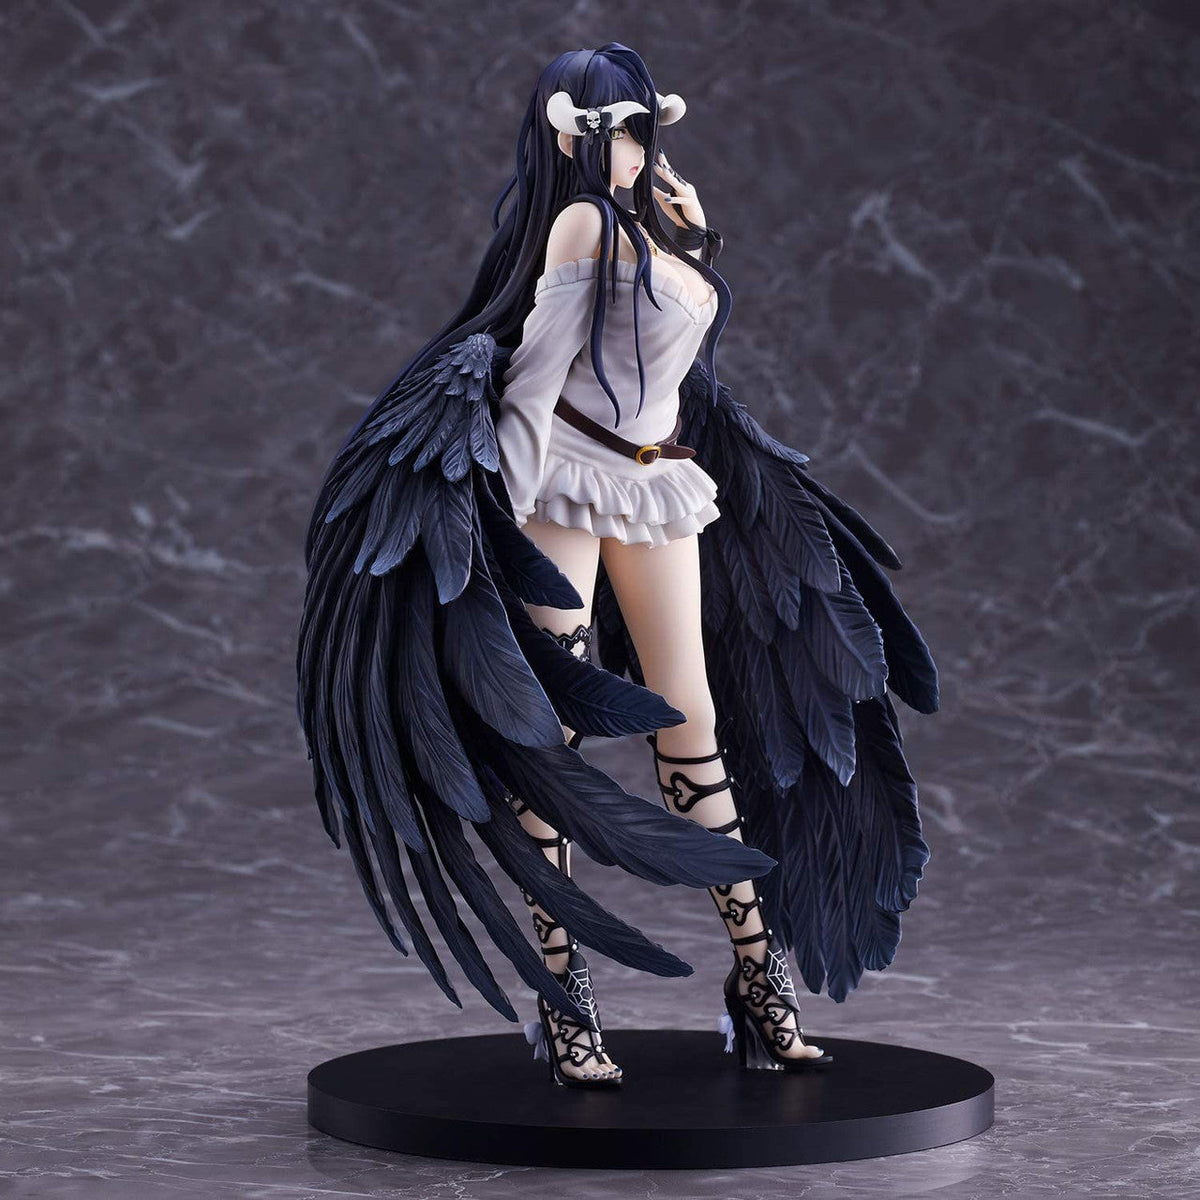 Overlord &quot;Albedo&quot; (So-Bin Ver. )-Union Creative-Ace Cards &amp; Collectibles